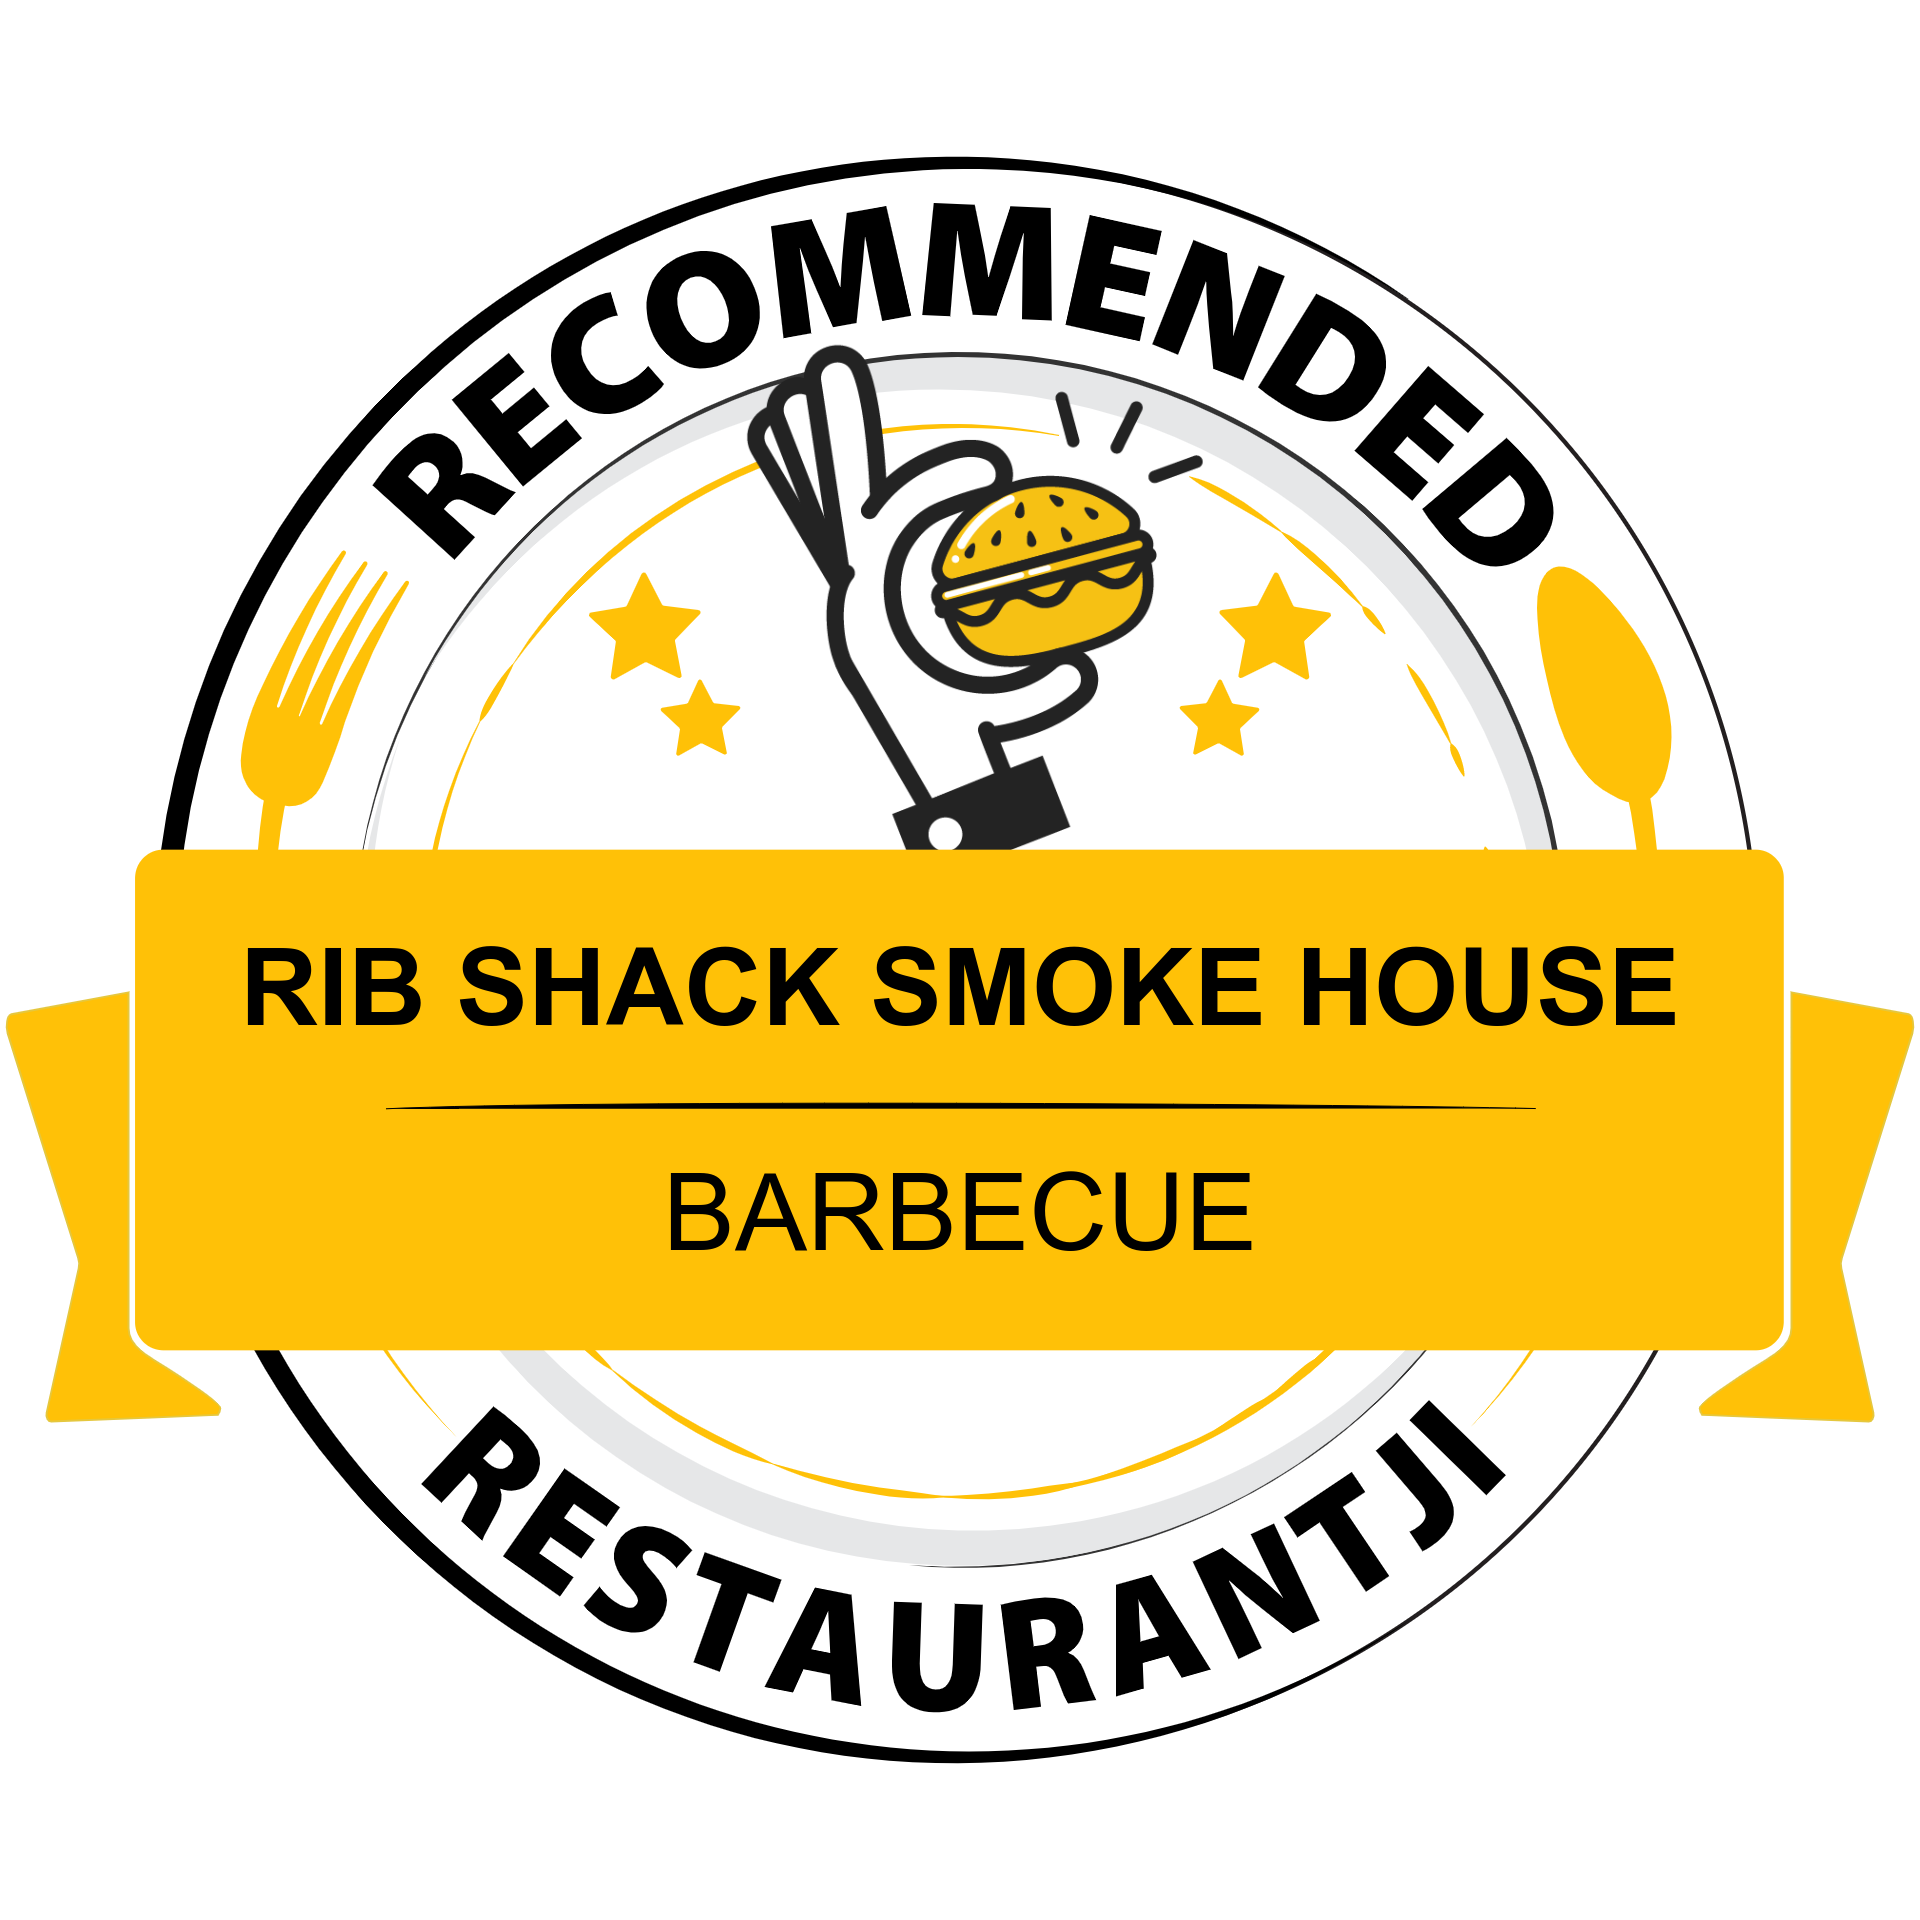 Rib Shack Smoke House is a go-to spot on Restaurantji - a platform featuring over 1,000,000 restaurants across the USA and Canada.